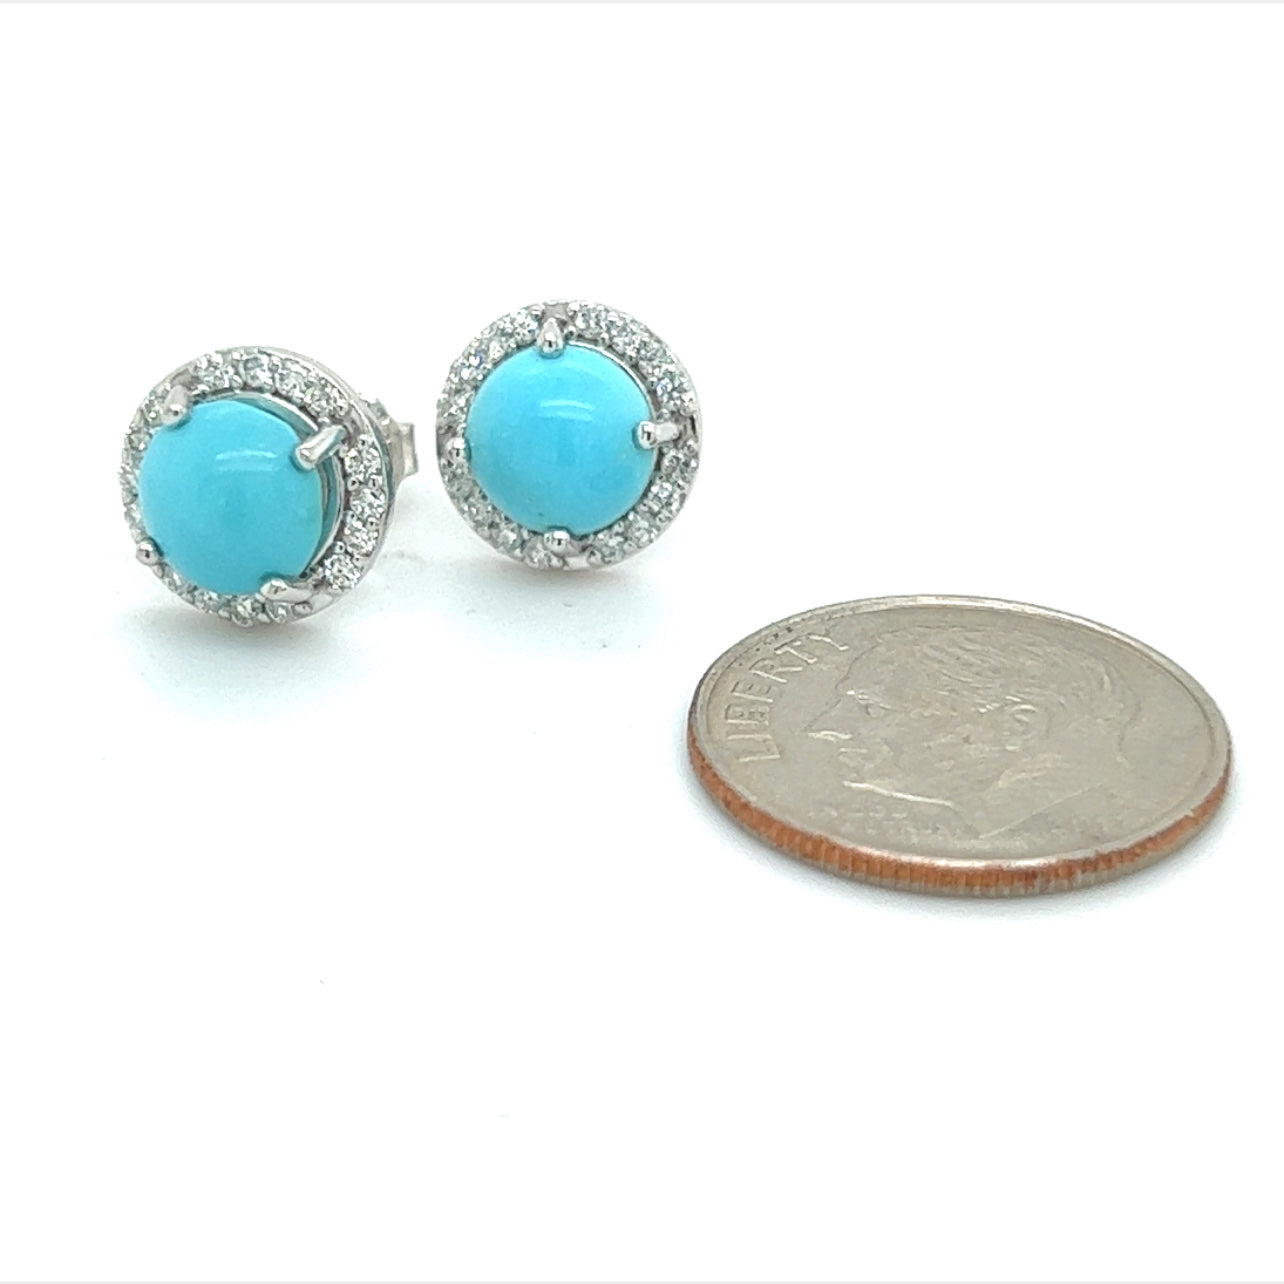 Natural Turquoise Diamond Stud Earrings 14k White Gold 2.95 TCW Certified $2,490 217835 - Certified Fine Jewelry